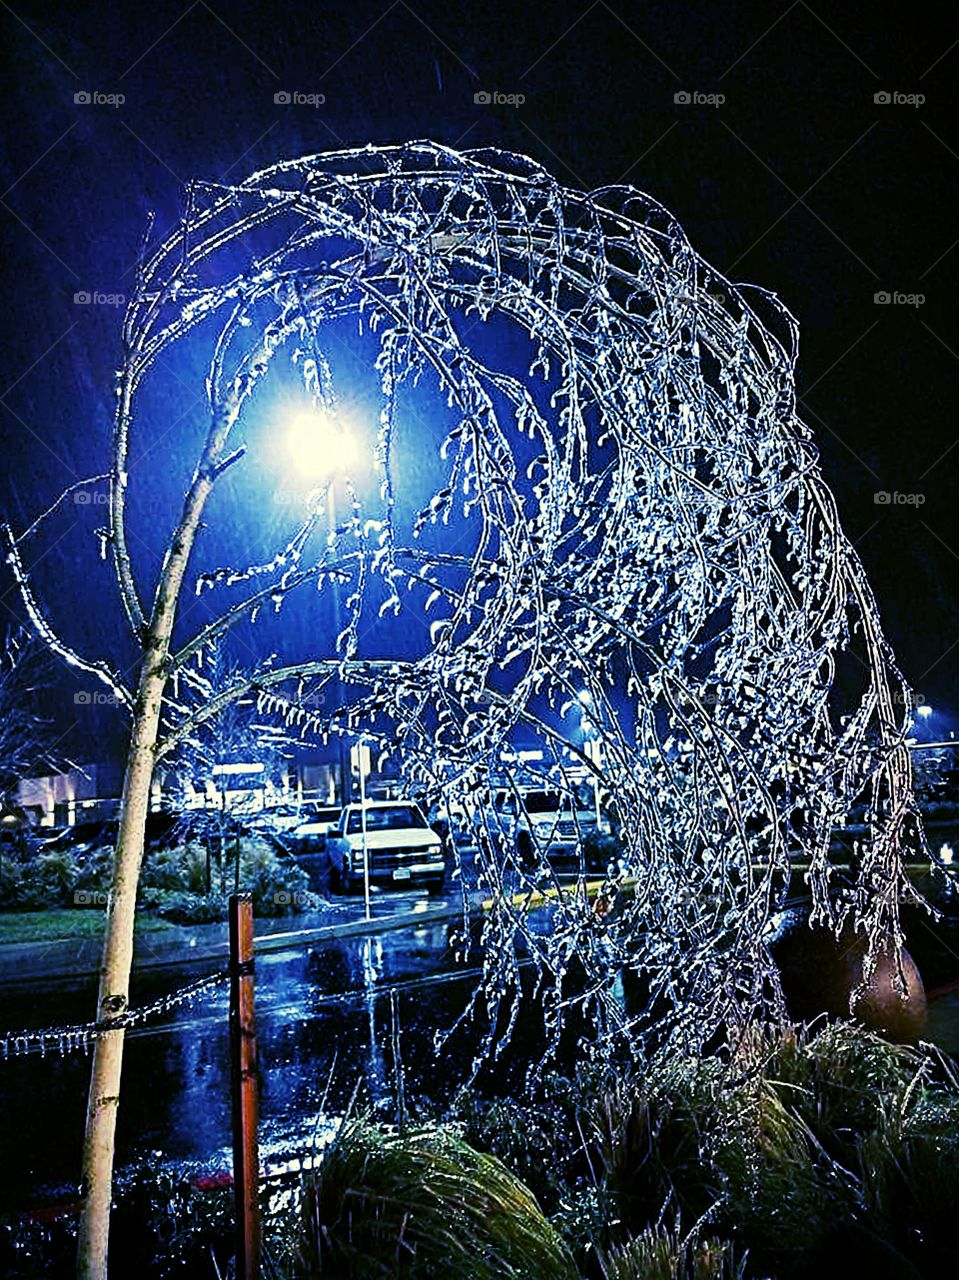 Accumulation of ice on tree branches, bends tree into a circular display of winter beauty, as a street light illuminates it's icicles, under a night sky.